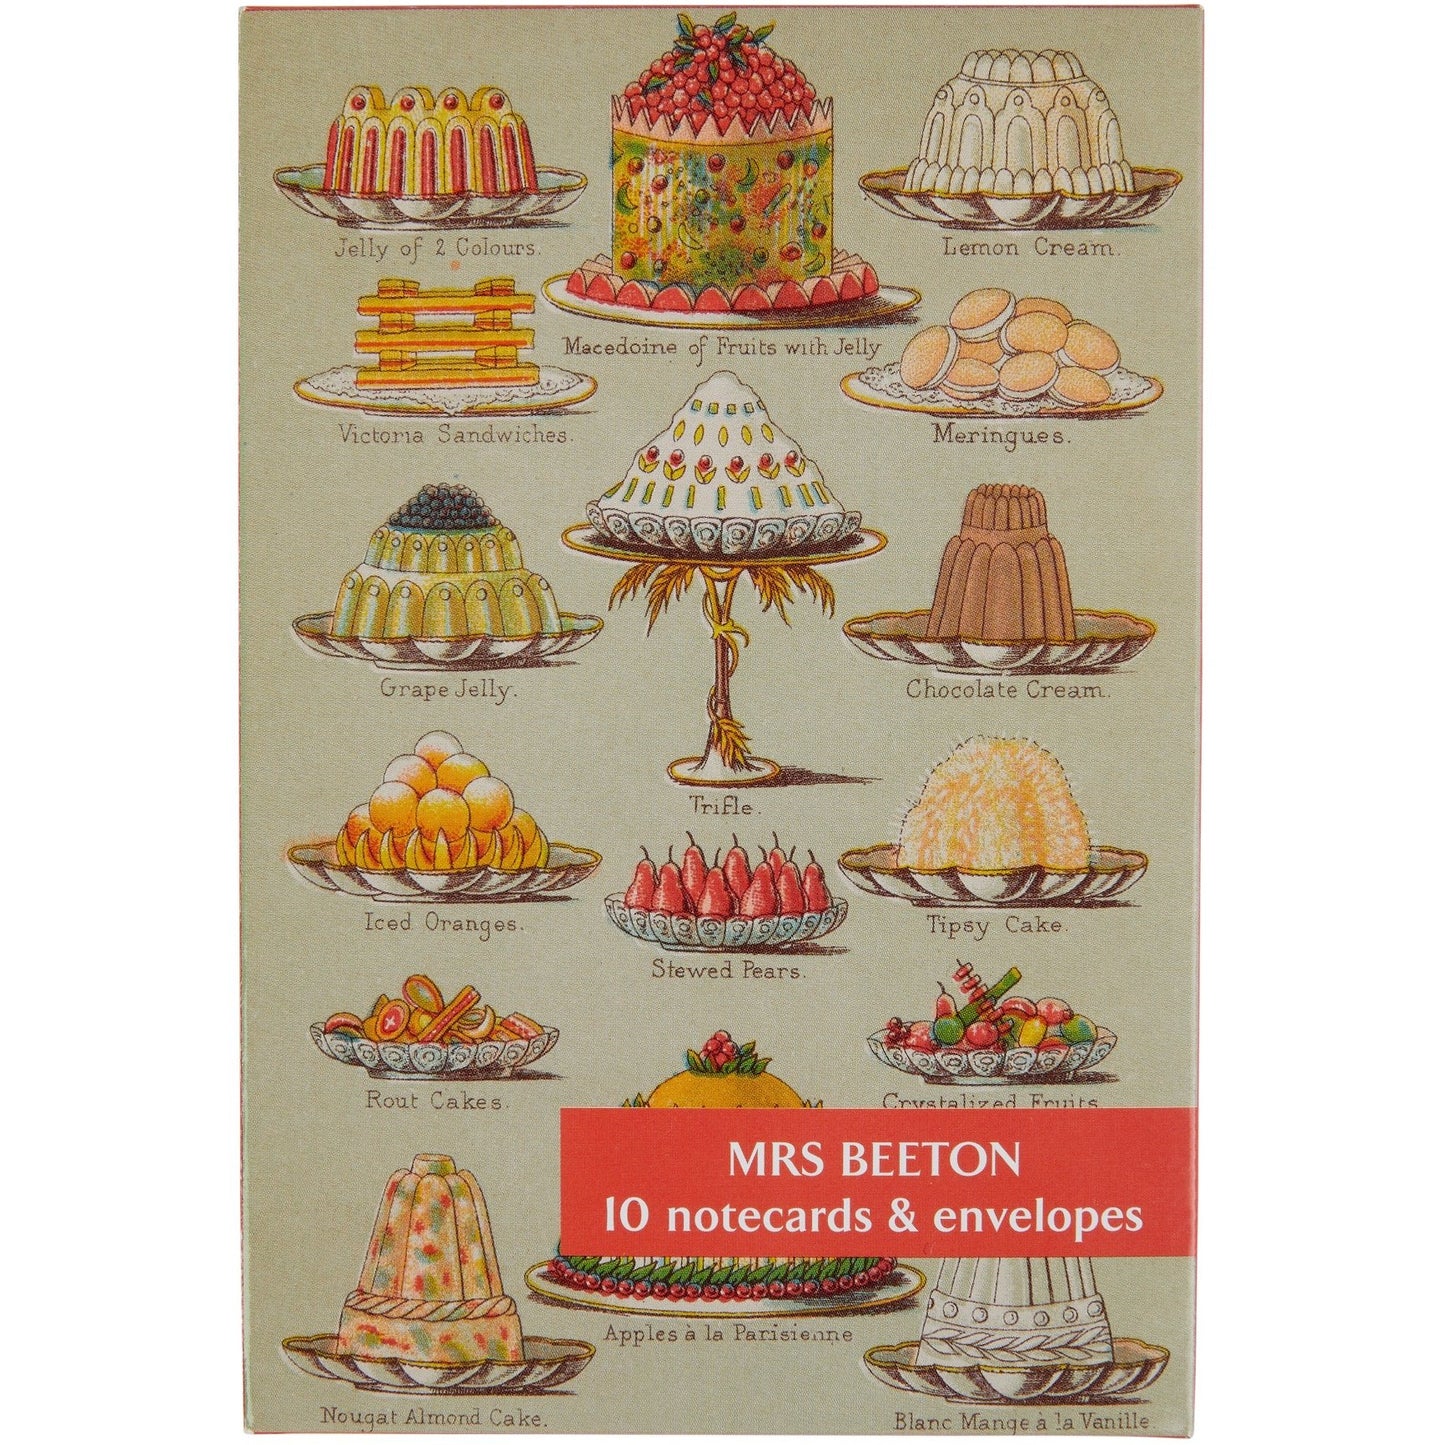 Notecard pack - Mrs Beeton's Book of Household Management. Cover image - Jellies and Creams. From the collection of Cambridge University Library, brought to you by CuratingCambridge.co.uk